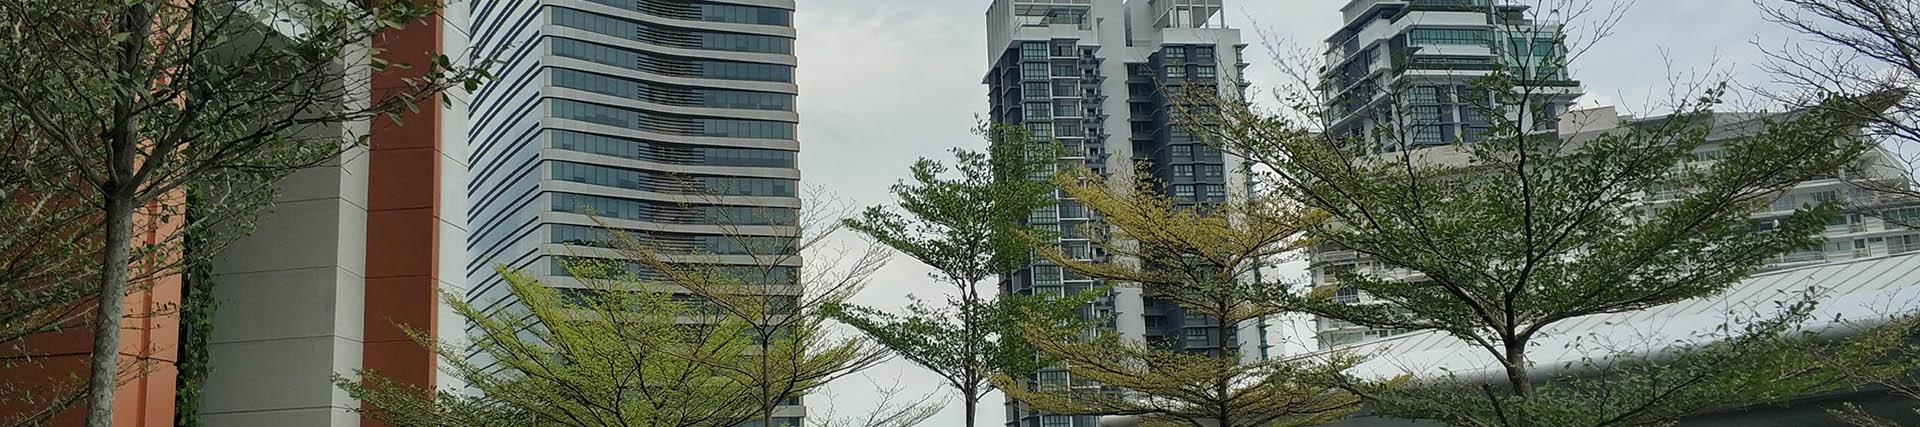 Several trees in pictured in front of four modern buildings